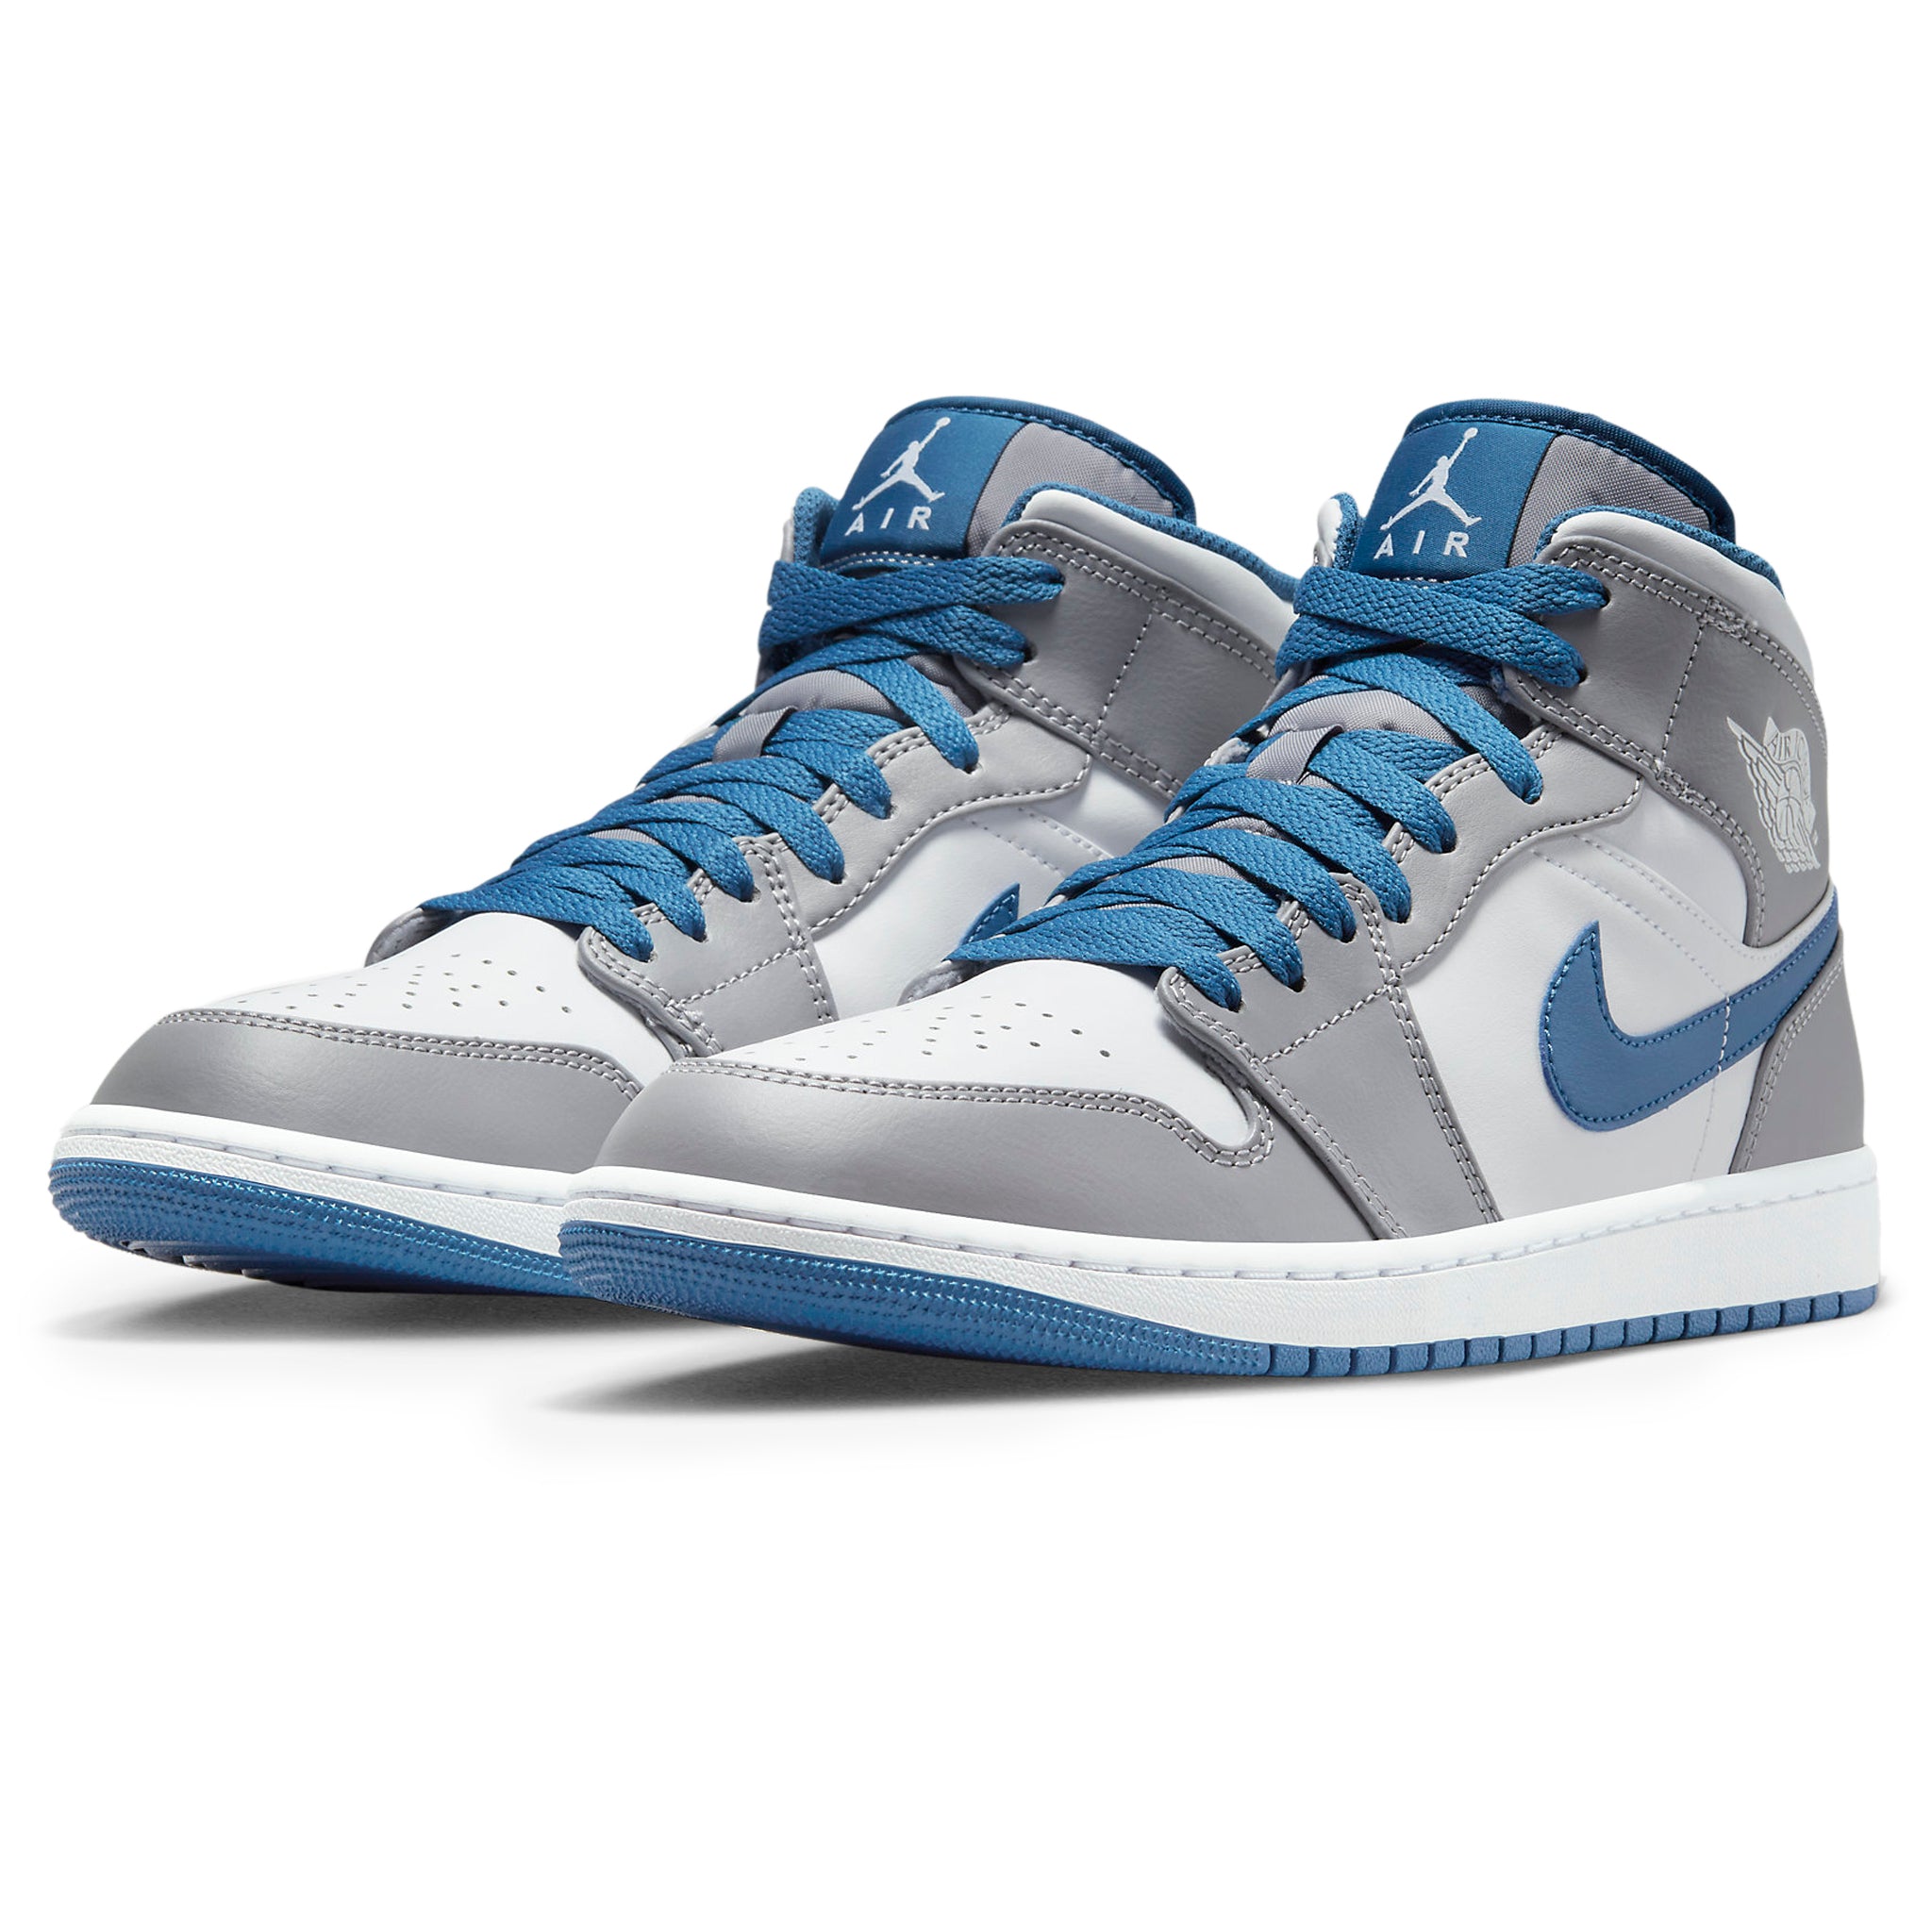 Front side view of Air Jordan 1 Mid True Blue Cement DQ8426-014